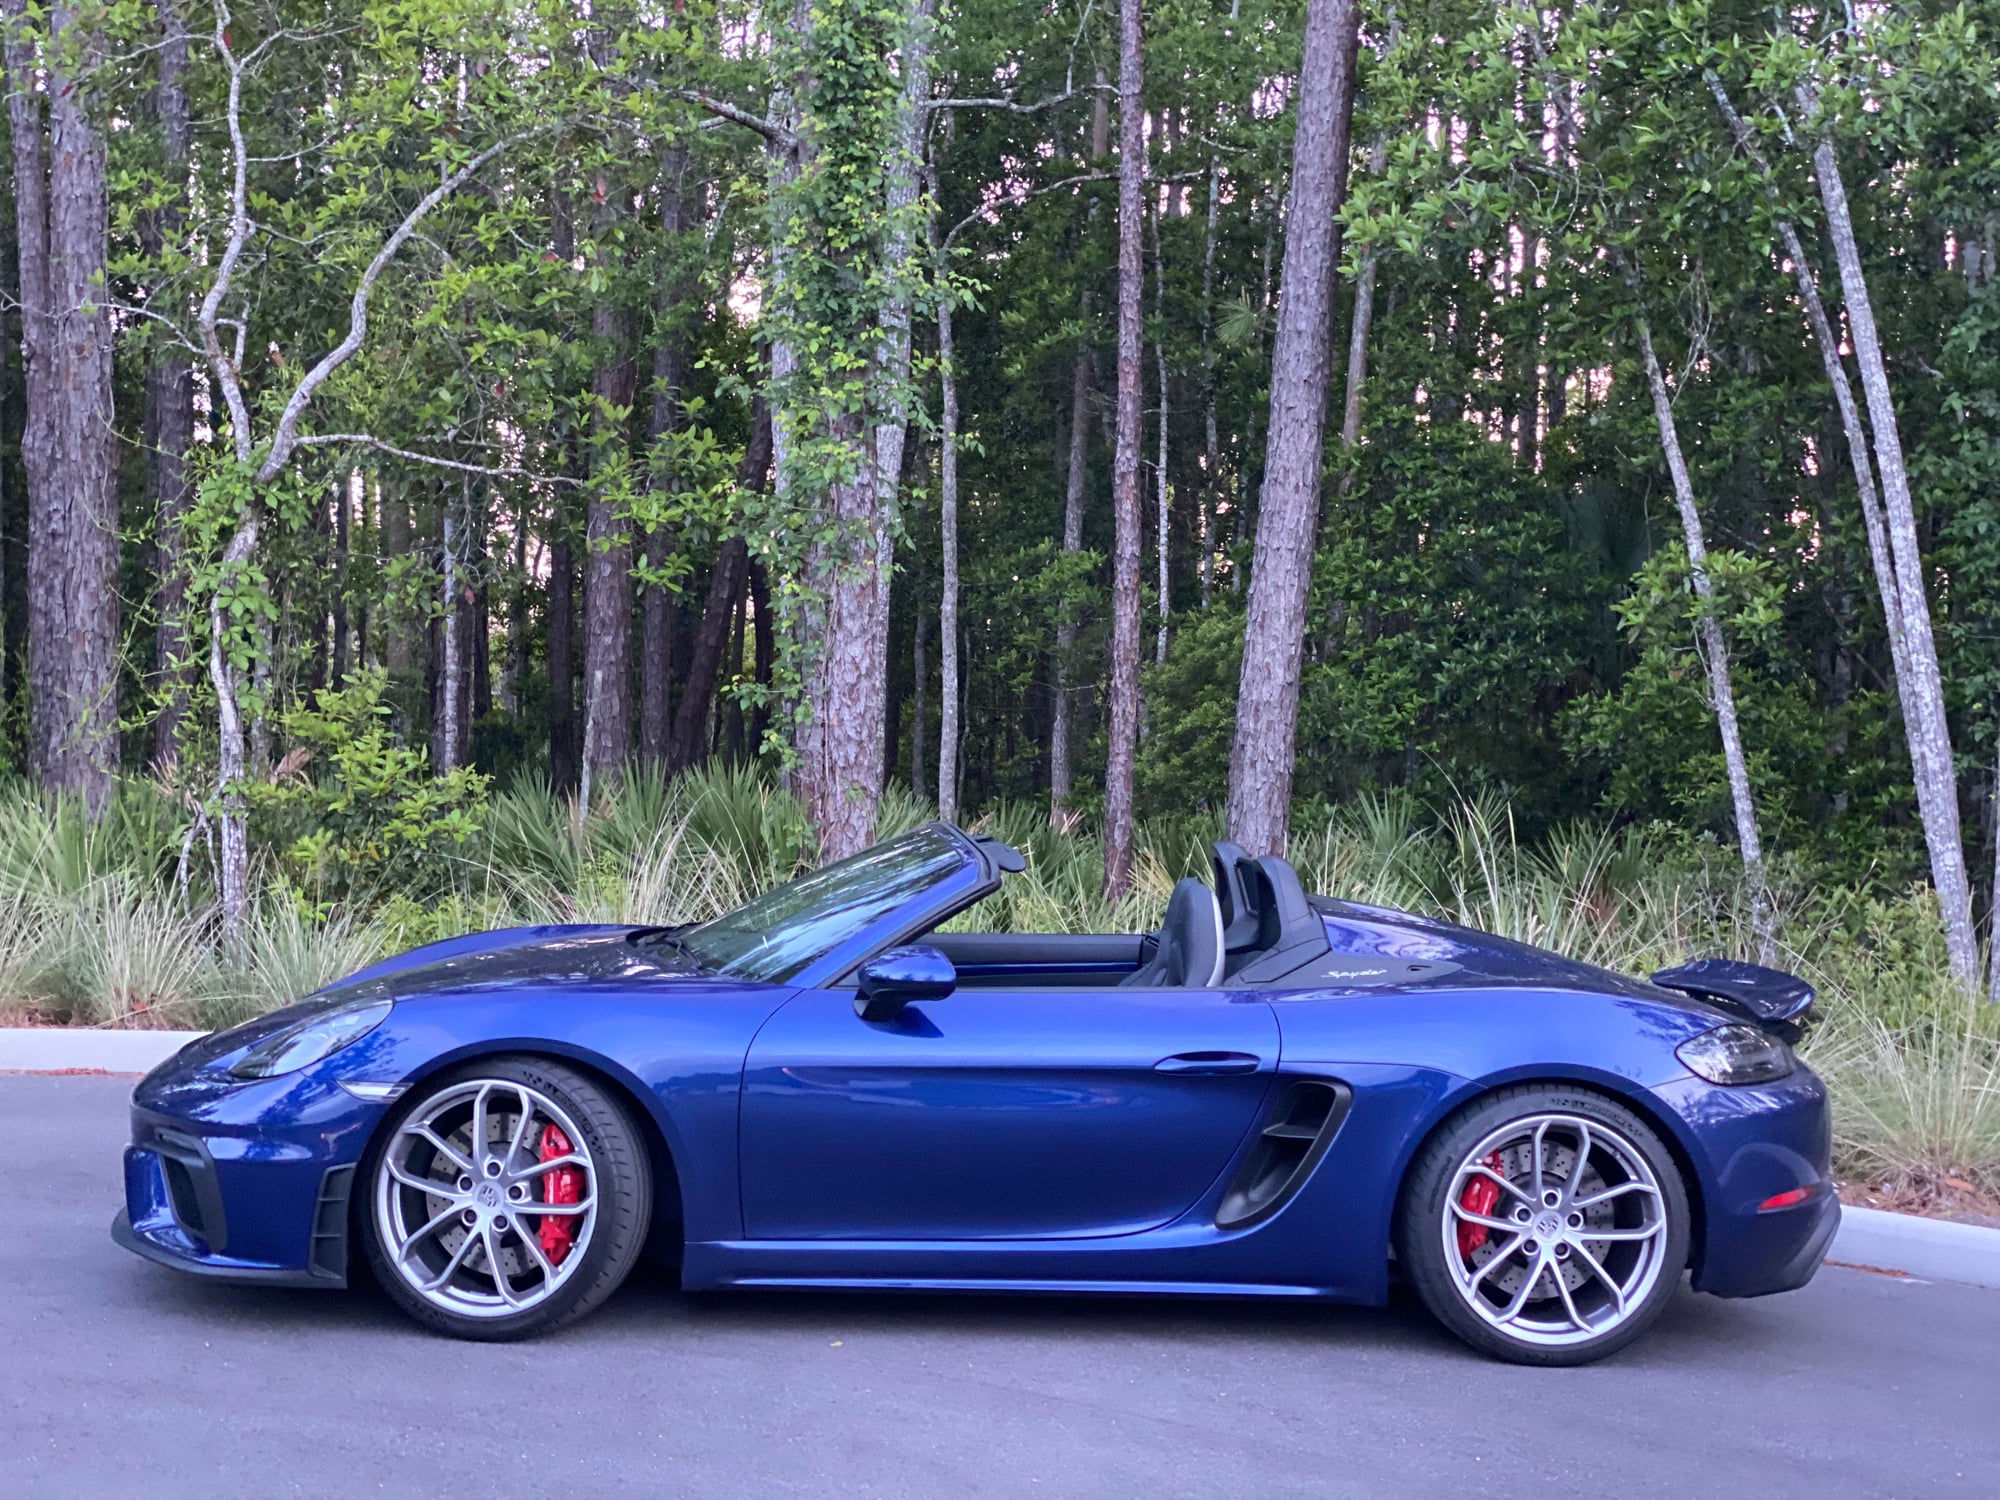 2020 Porsche 718 Spyder - 2020 718 Spyder - Used - VIN WP0CC2A82LS240650 - 7,000 Miles - 6 cyl - 2WD - Manual - Convertible - Blue - Ponte Vedra, FL 32081, United States